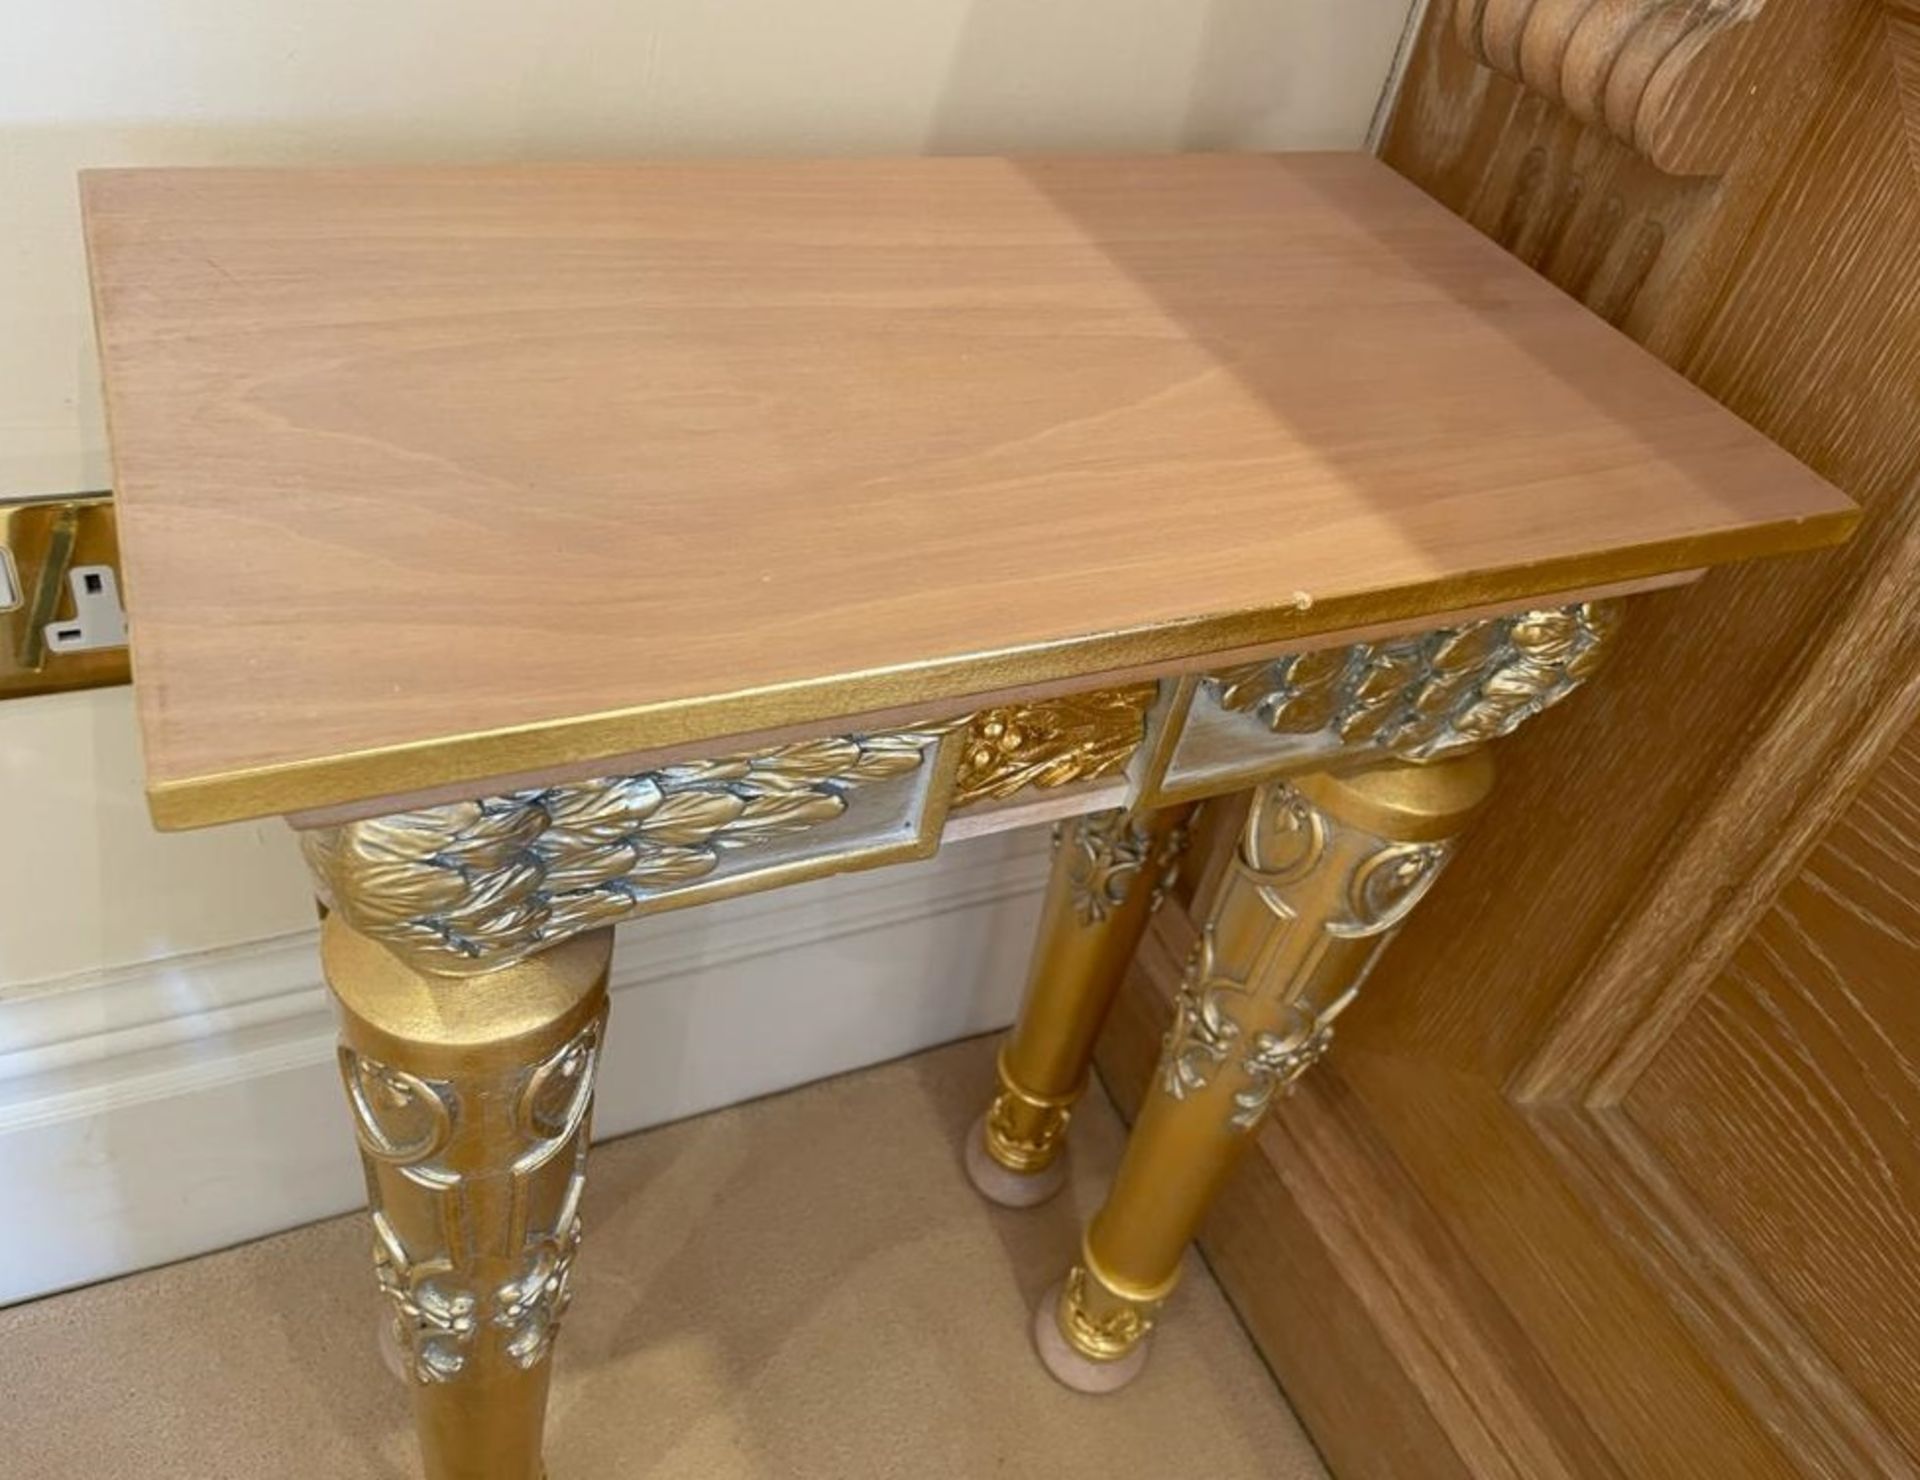 1 x Hand Carved Ornate Lamp Tables Complimented With Birchwood Veneer, Golden Pillar Legs, Carved - Image 5 of 10